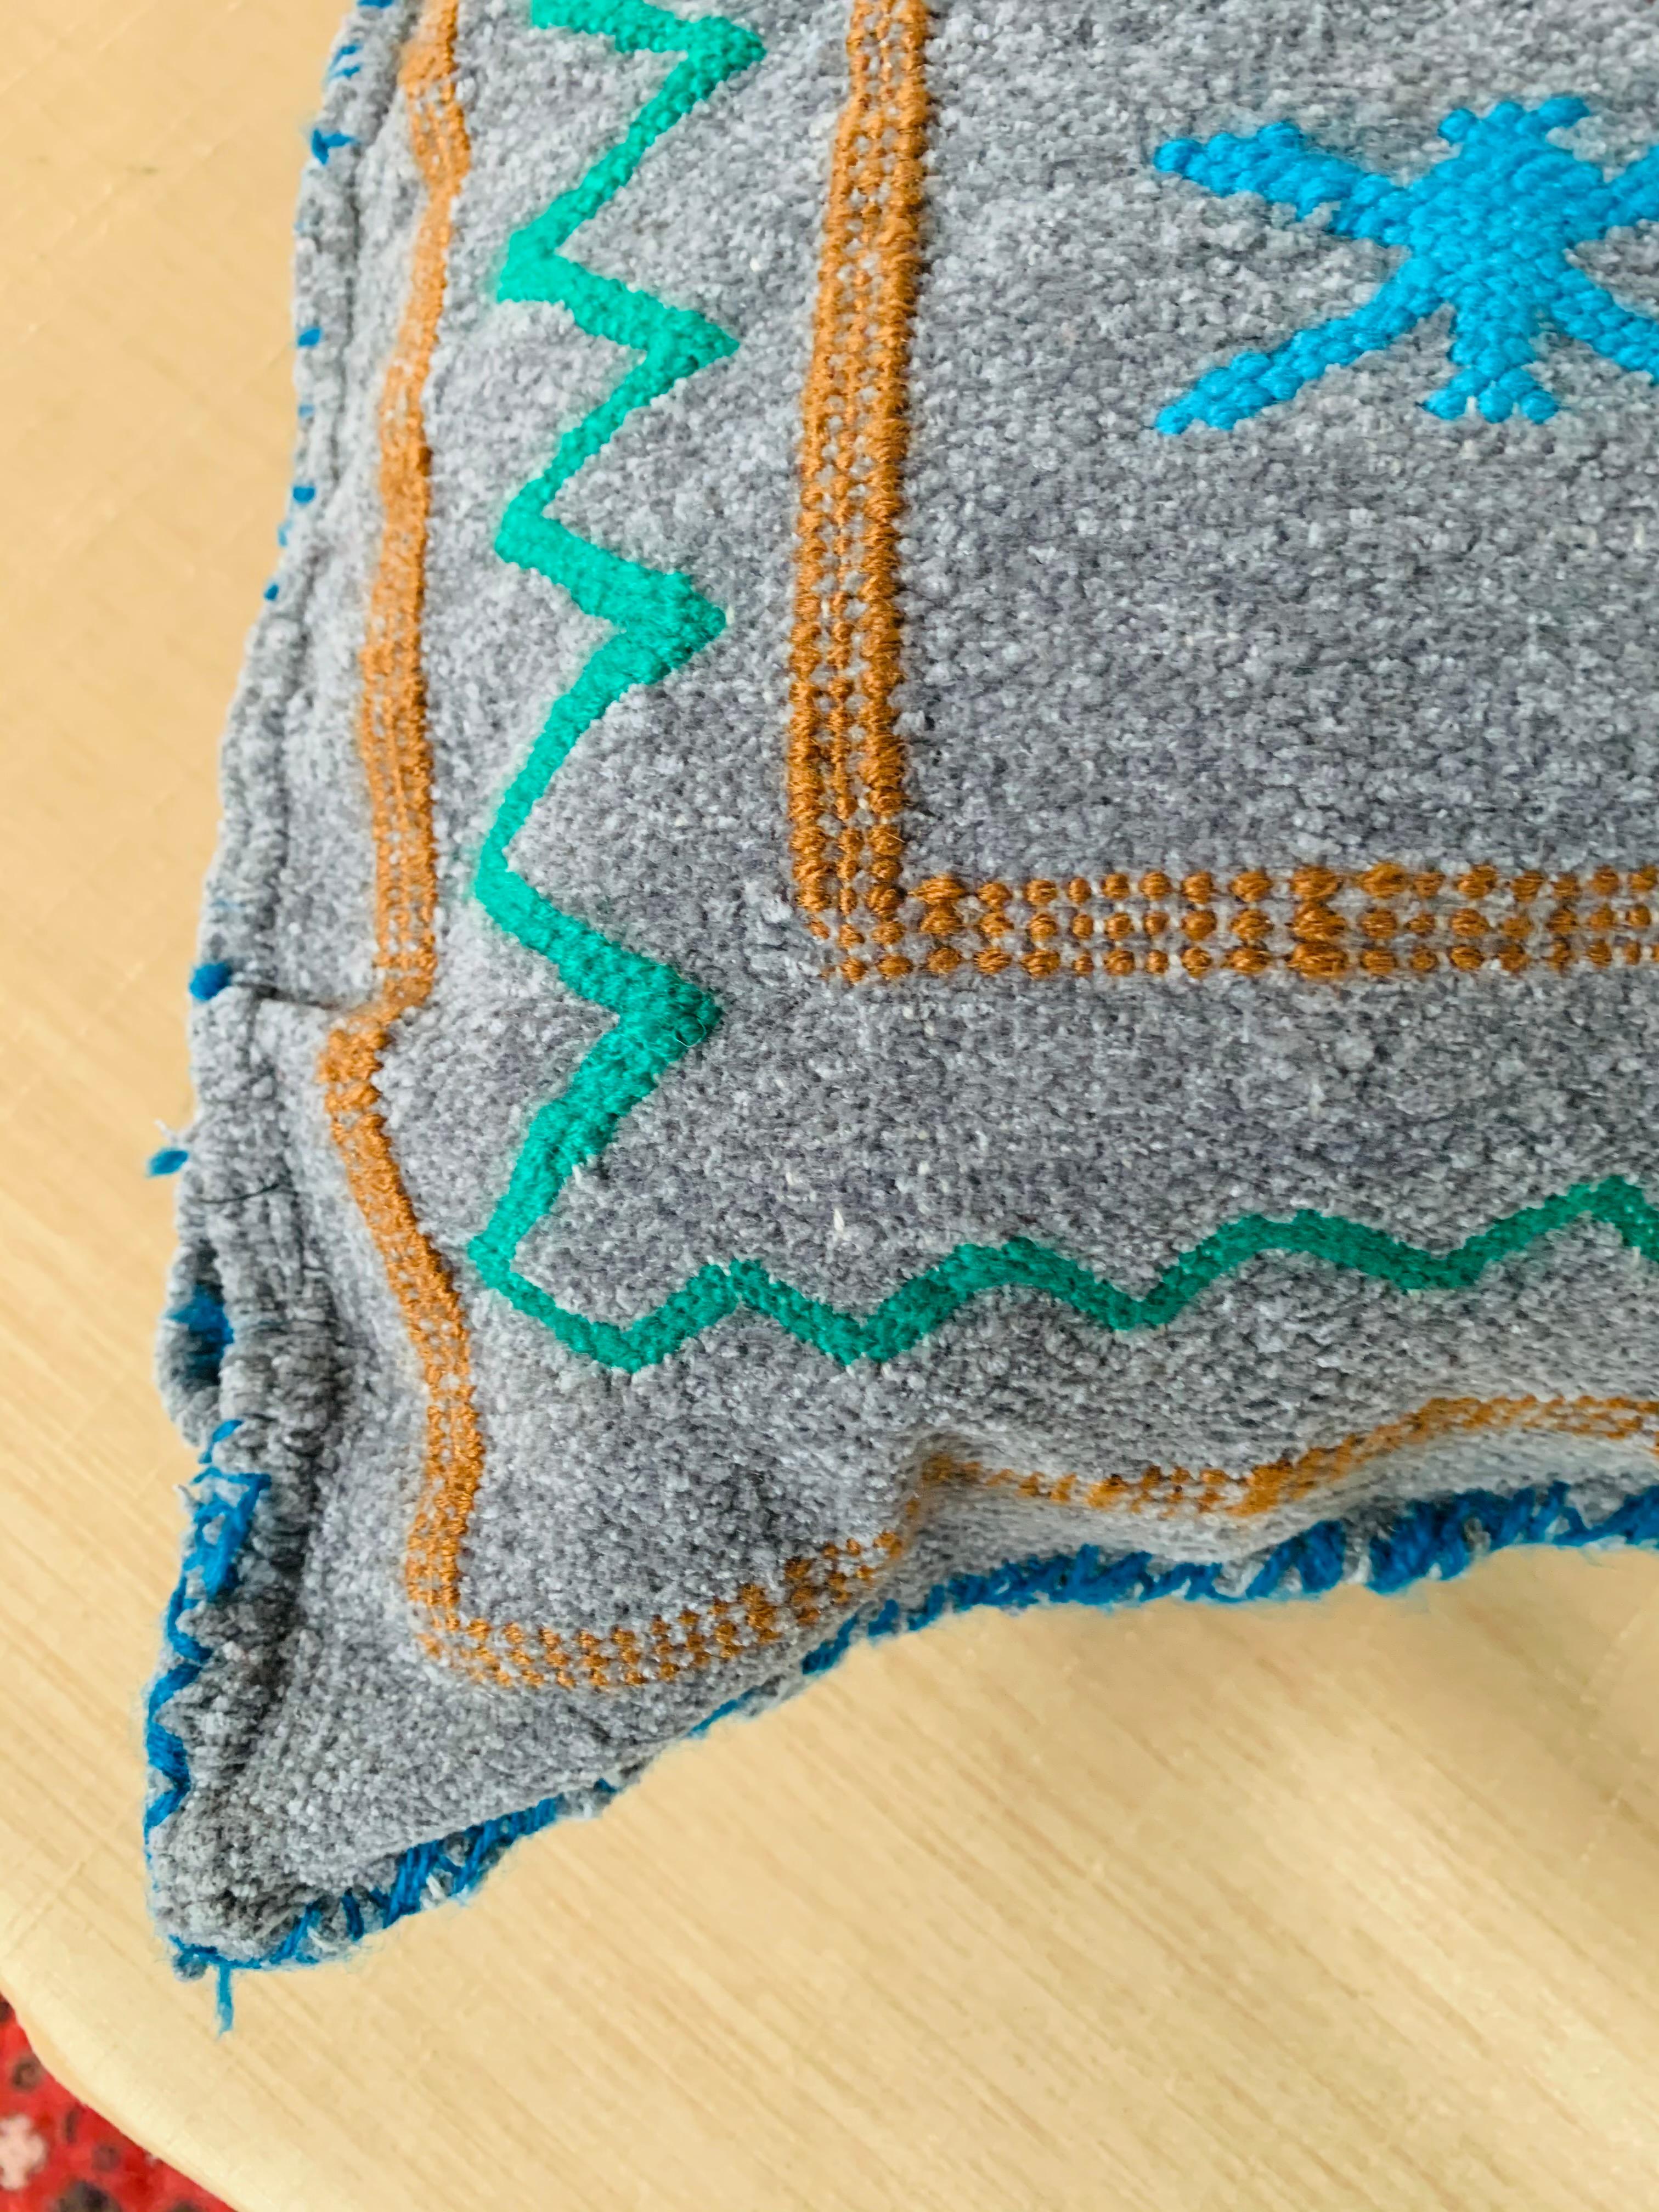 A one of a kind vintage Moroccan hand-loomed soft wool kilim pillow featuring Berber tribal original multi-color symbols' design on a grey/ blue background. this is made of a mix of soft sheep wool with all natural organic dyes.

